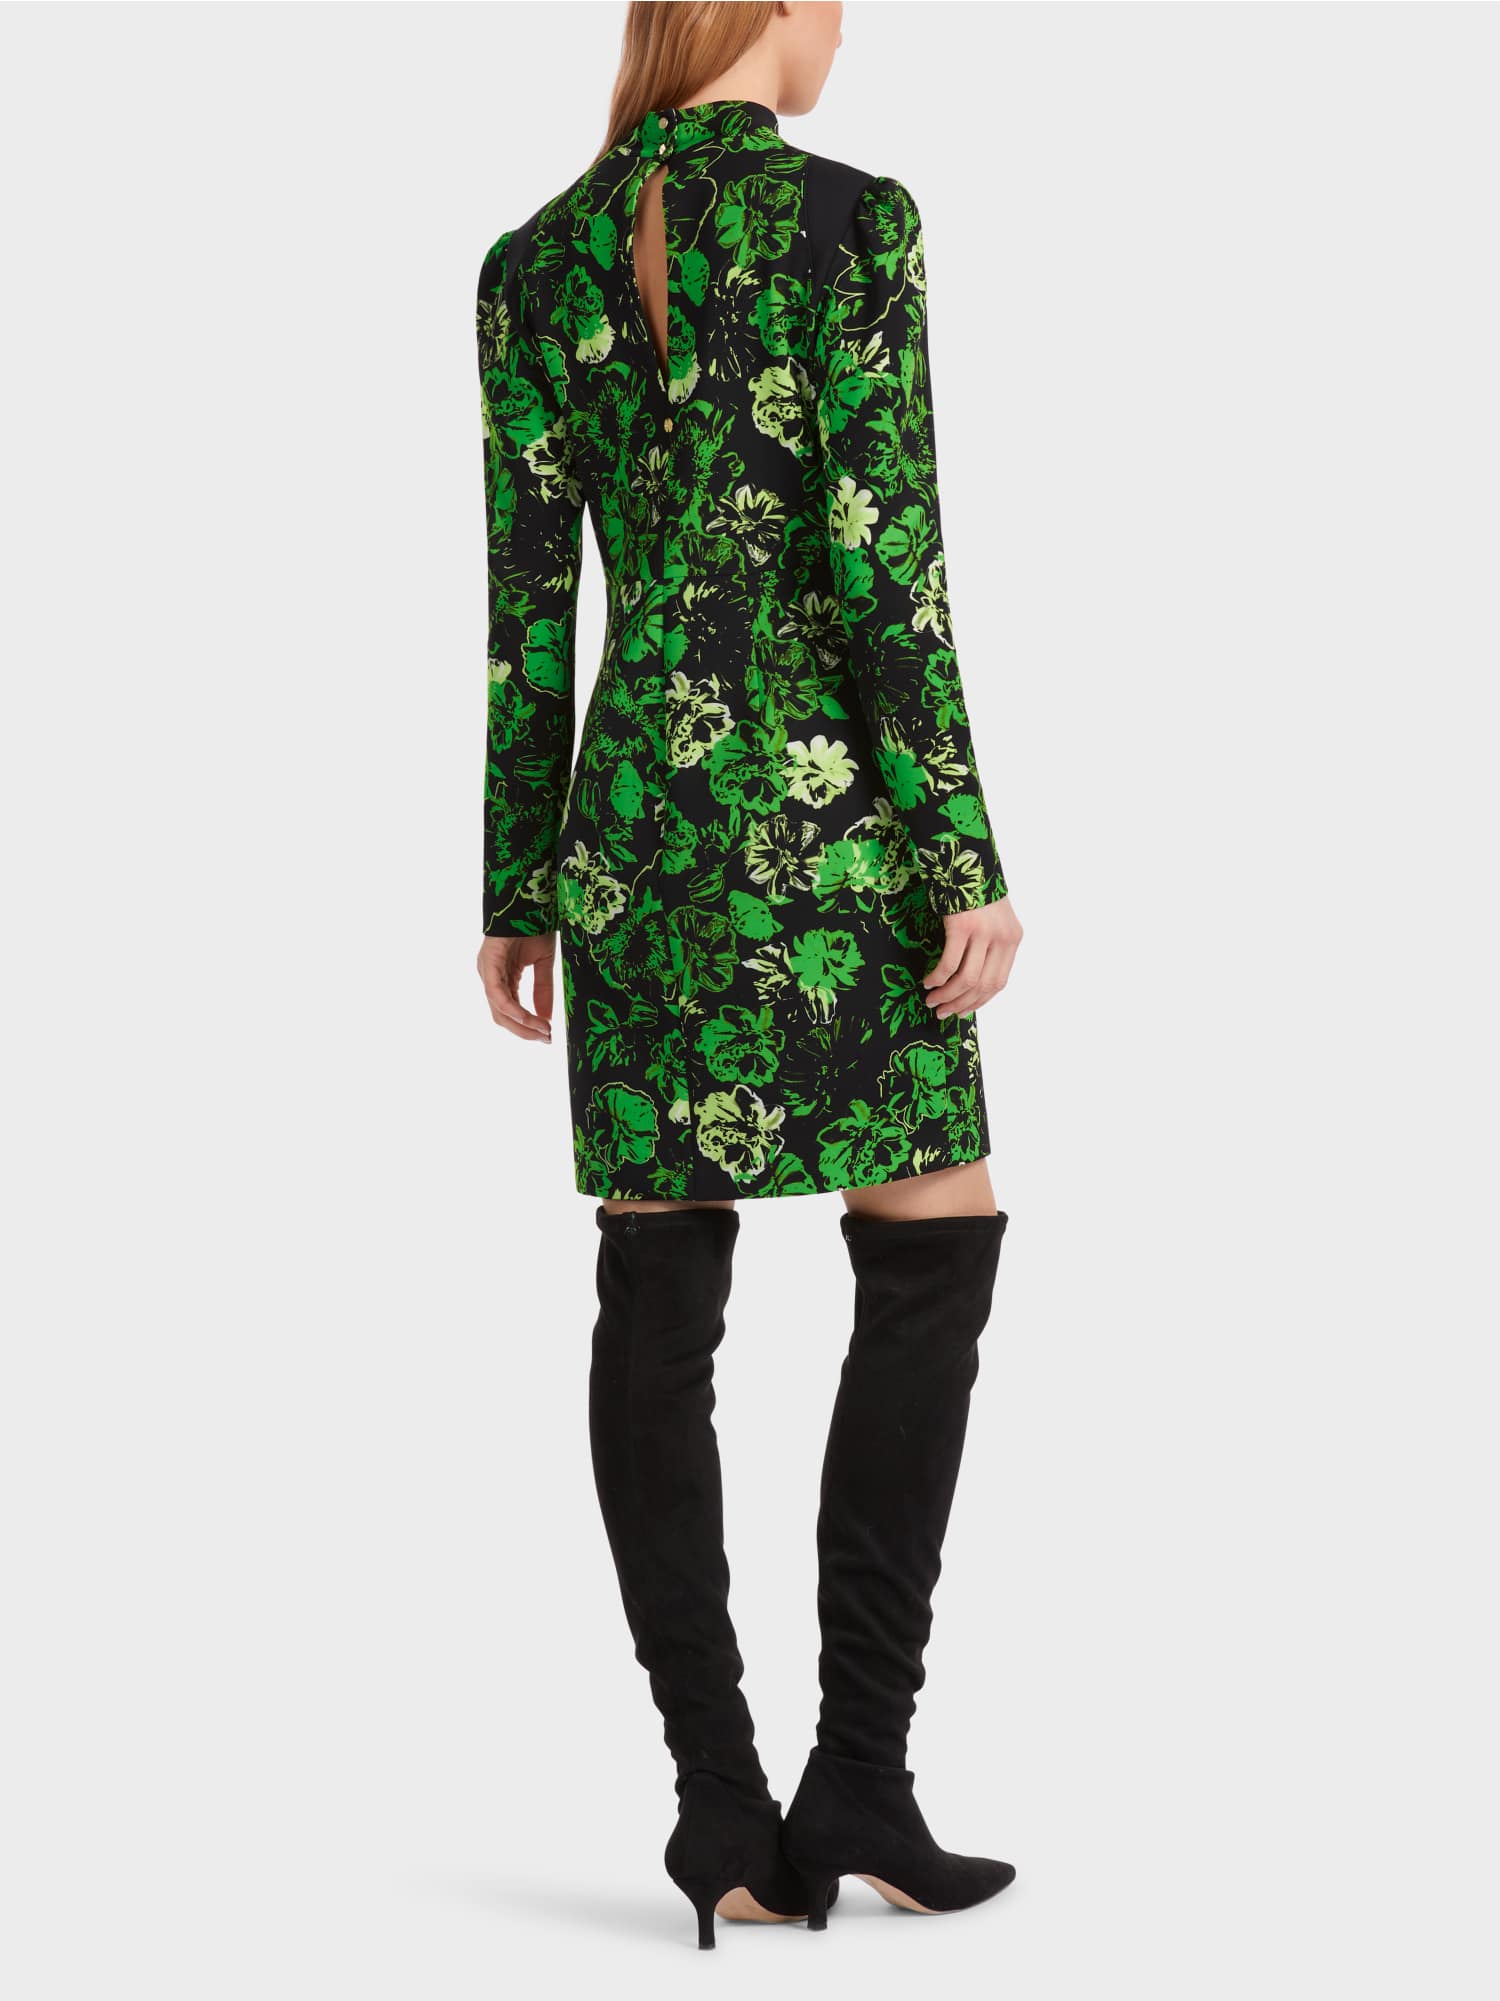 Marc Cain Printed Dress with Balloon sleeve